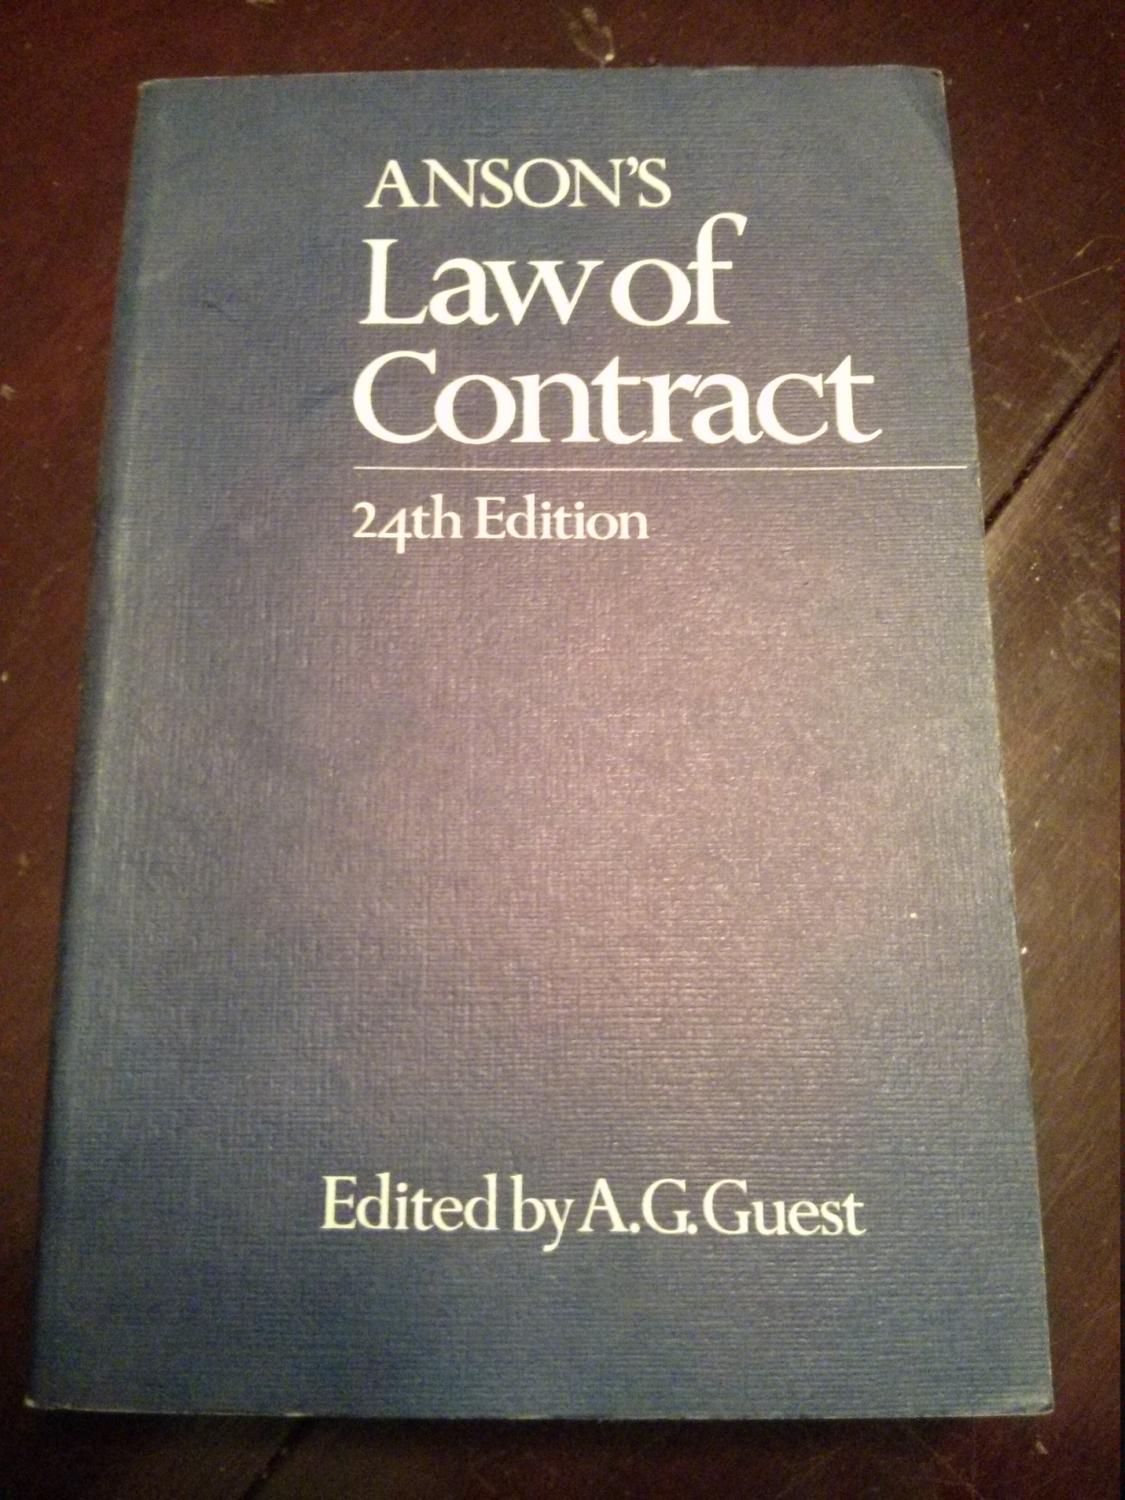 Anson's Law of Contract - A.G. Guest